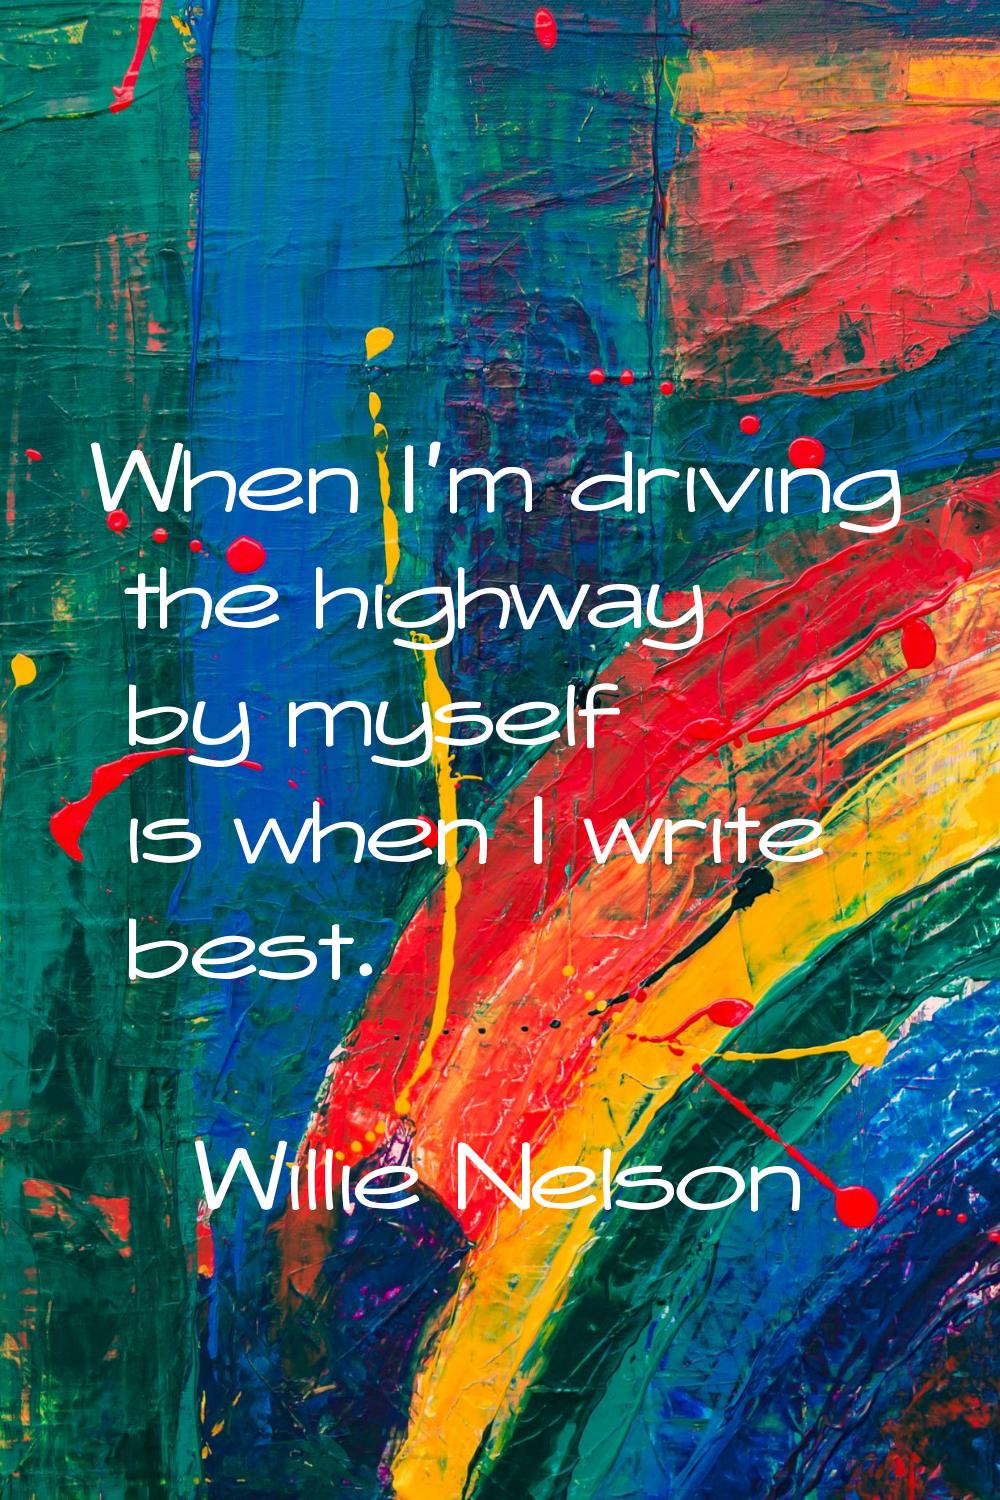 When I'm driving the highway by myself is when I write best.